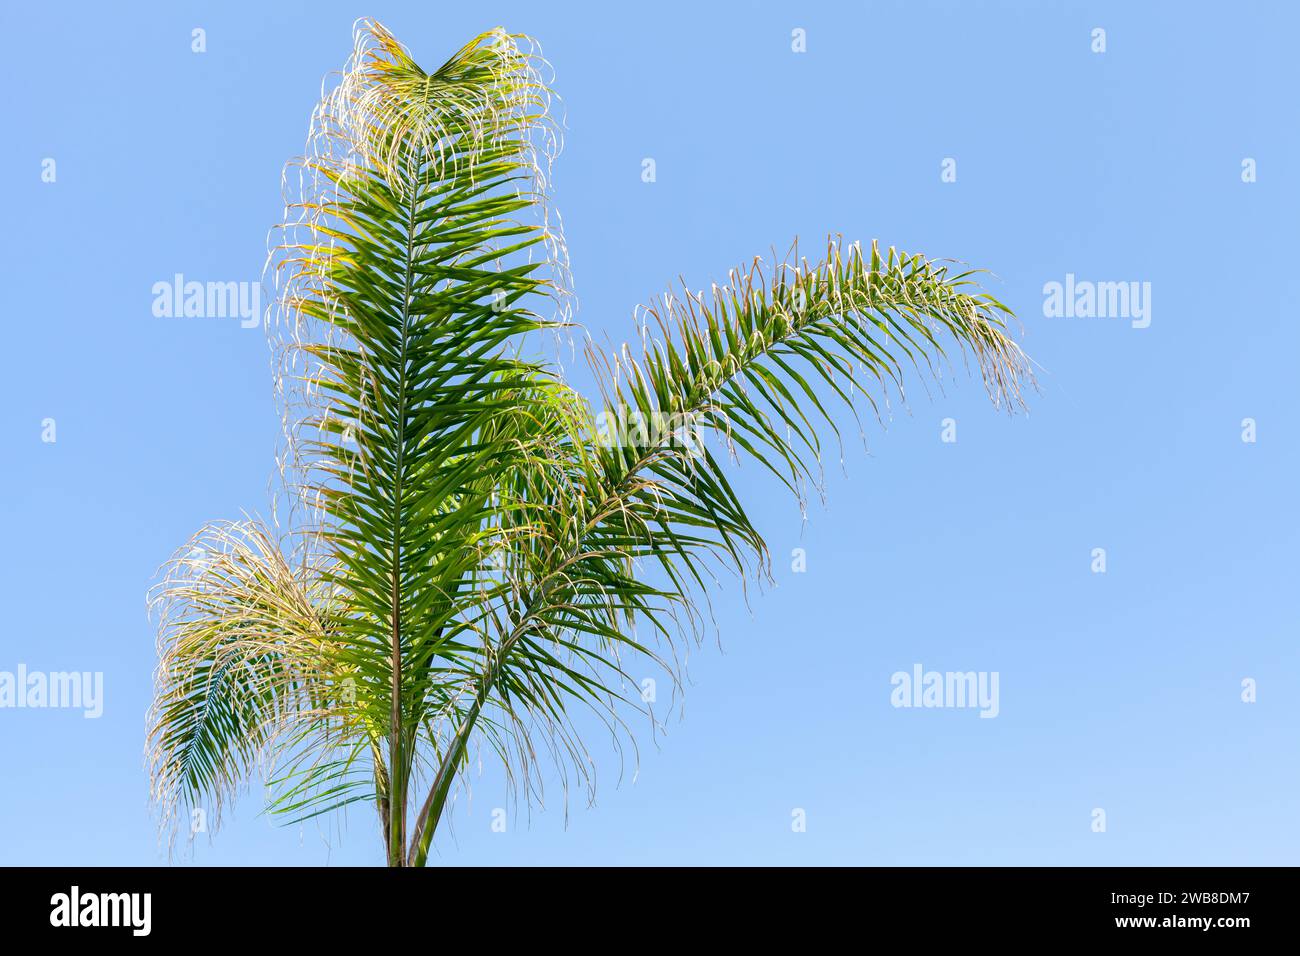 Green palm leaves are under blue sky on a sunny day. Syagrus romanzoffiana, the queen palm or cocos palm, is a palm native to South America Stock Photo